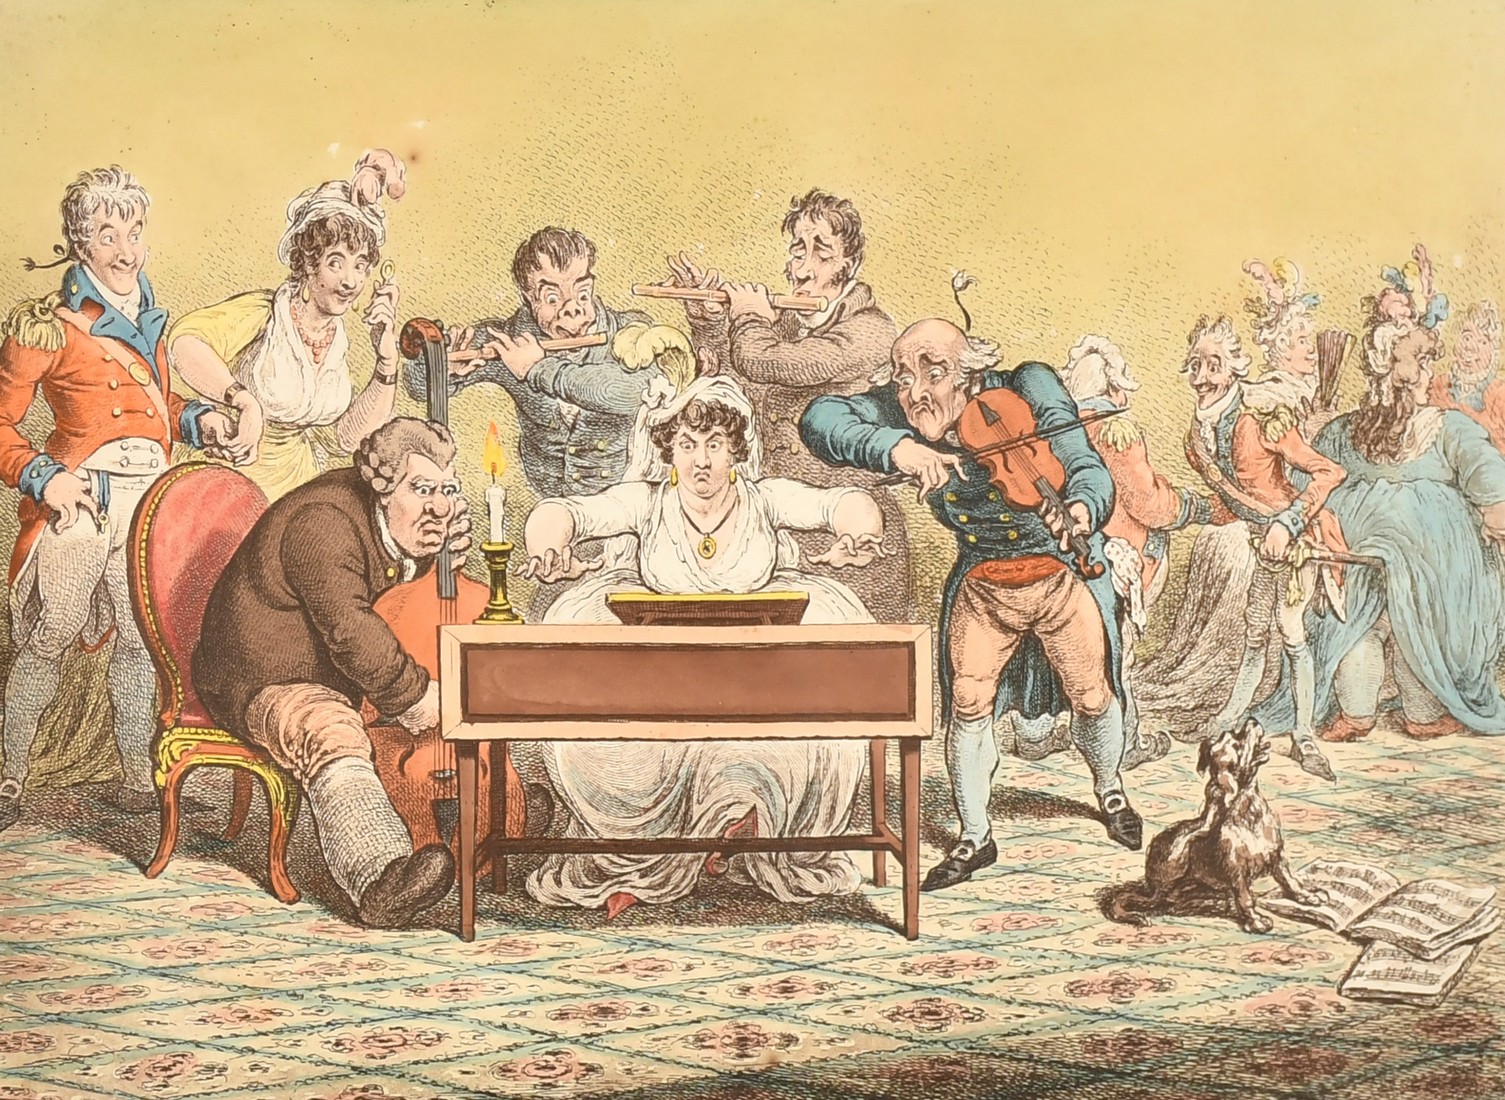 James Gillray (1757-1815) British, 'Playing in Parts', hand-coloured etching, 10.5" x 14.25" (26.5 x